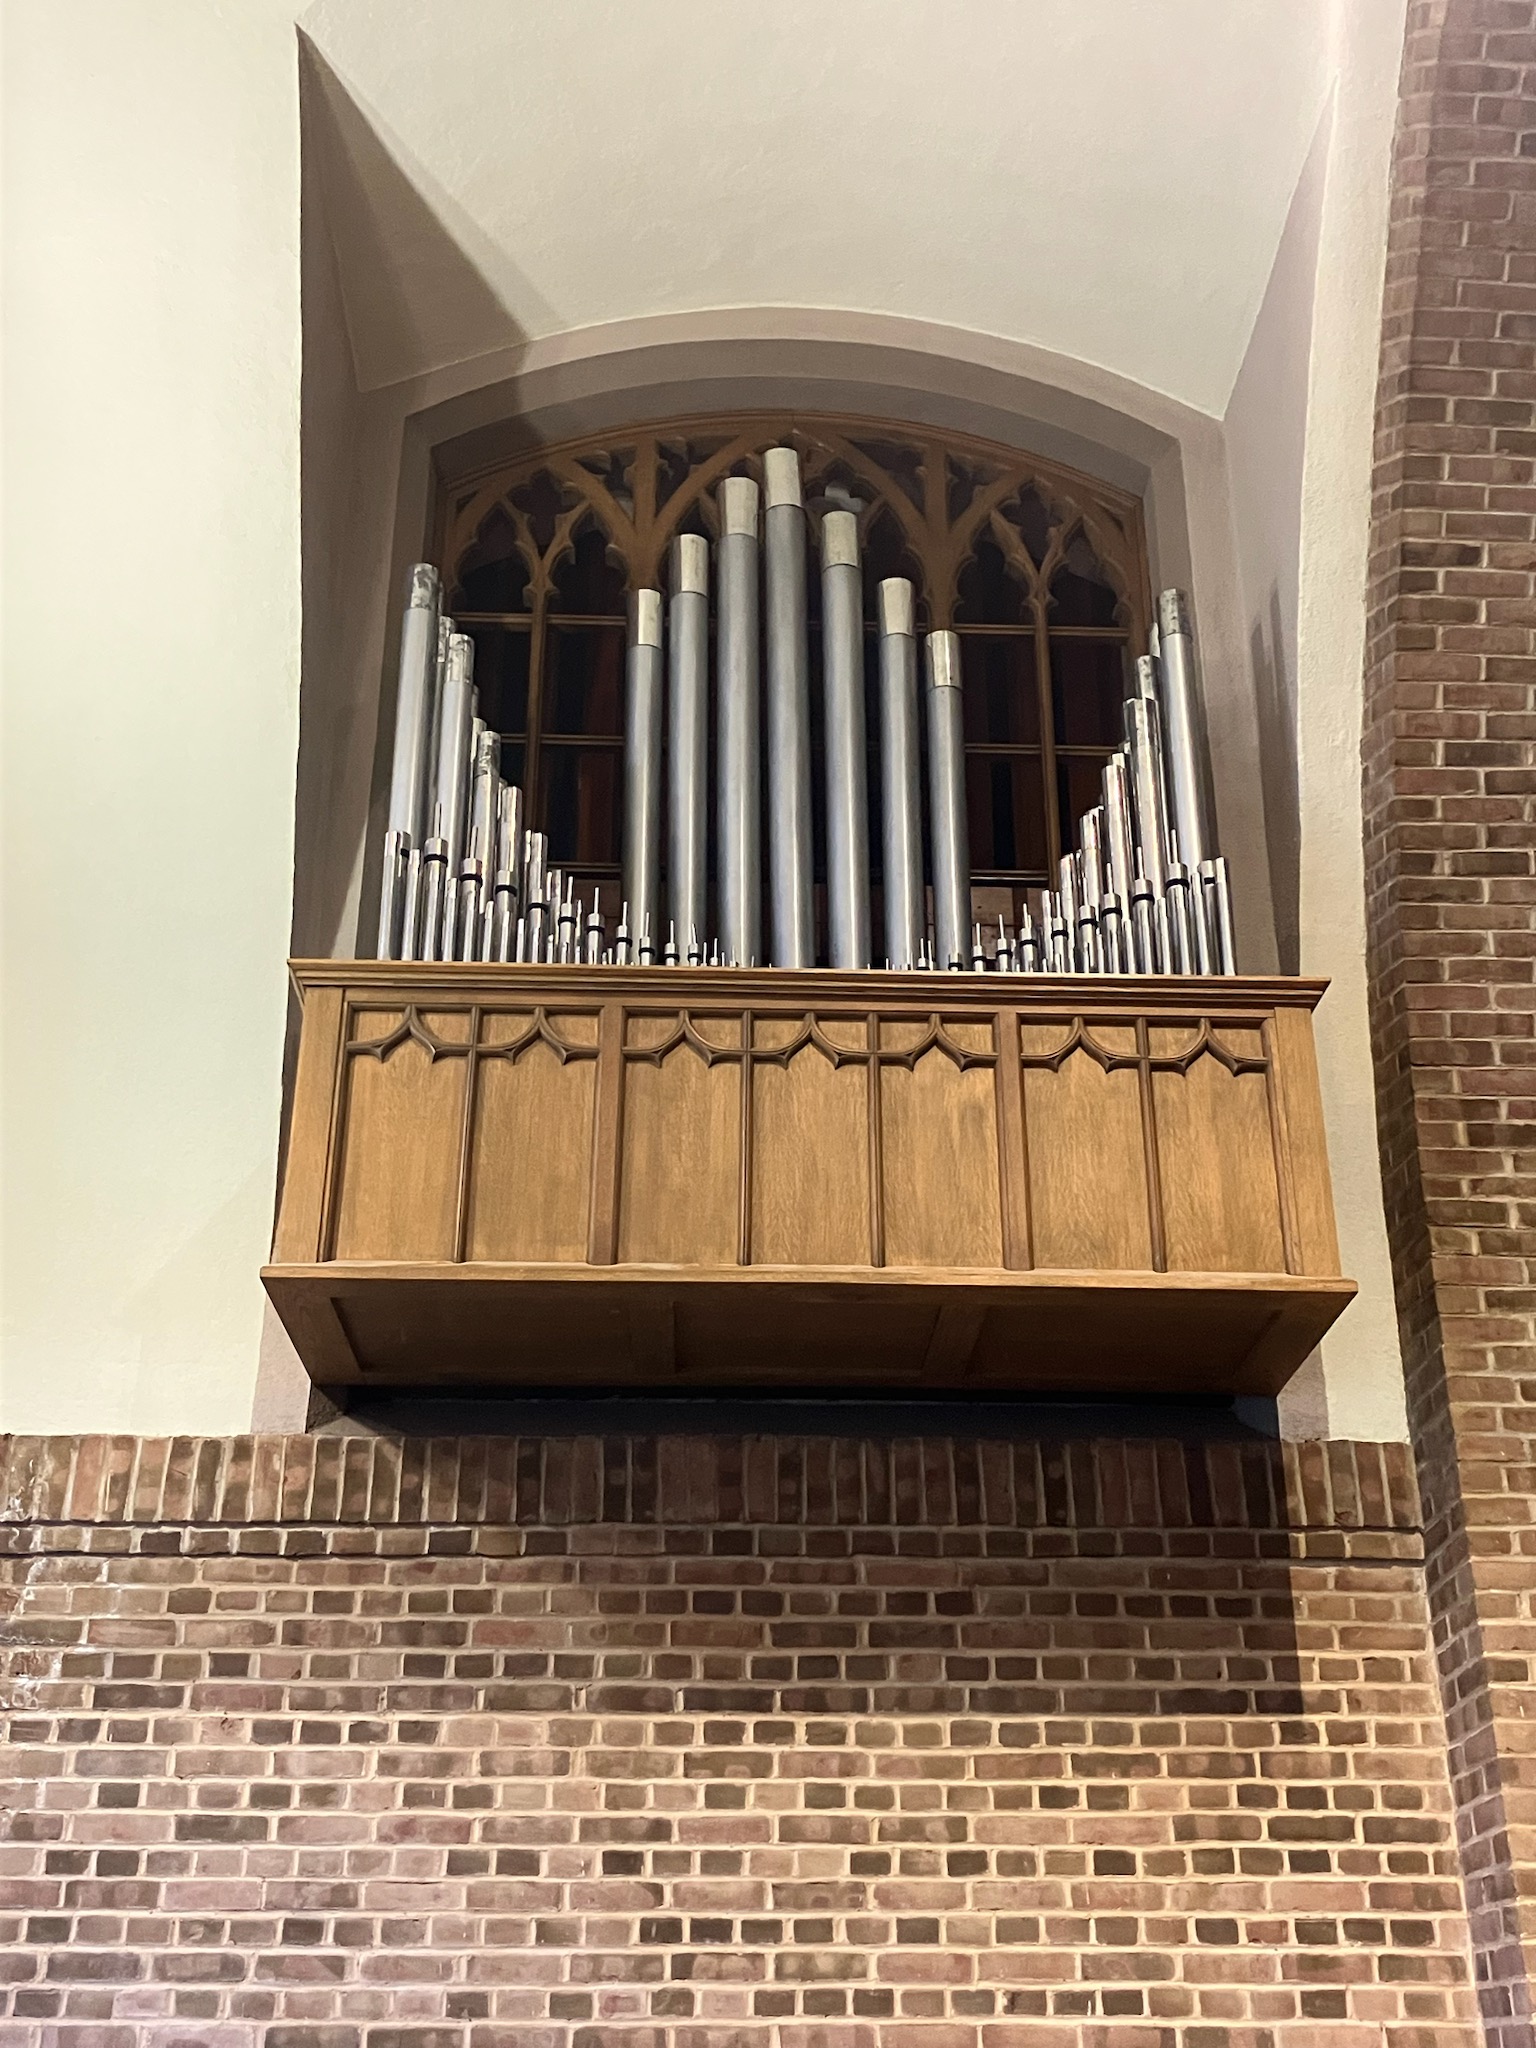 Red River Revitalizes the Organ at St. Gregory’s Abbey